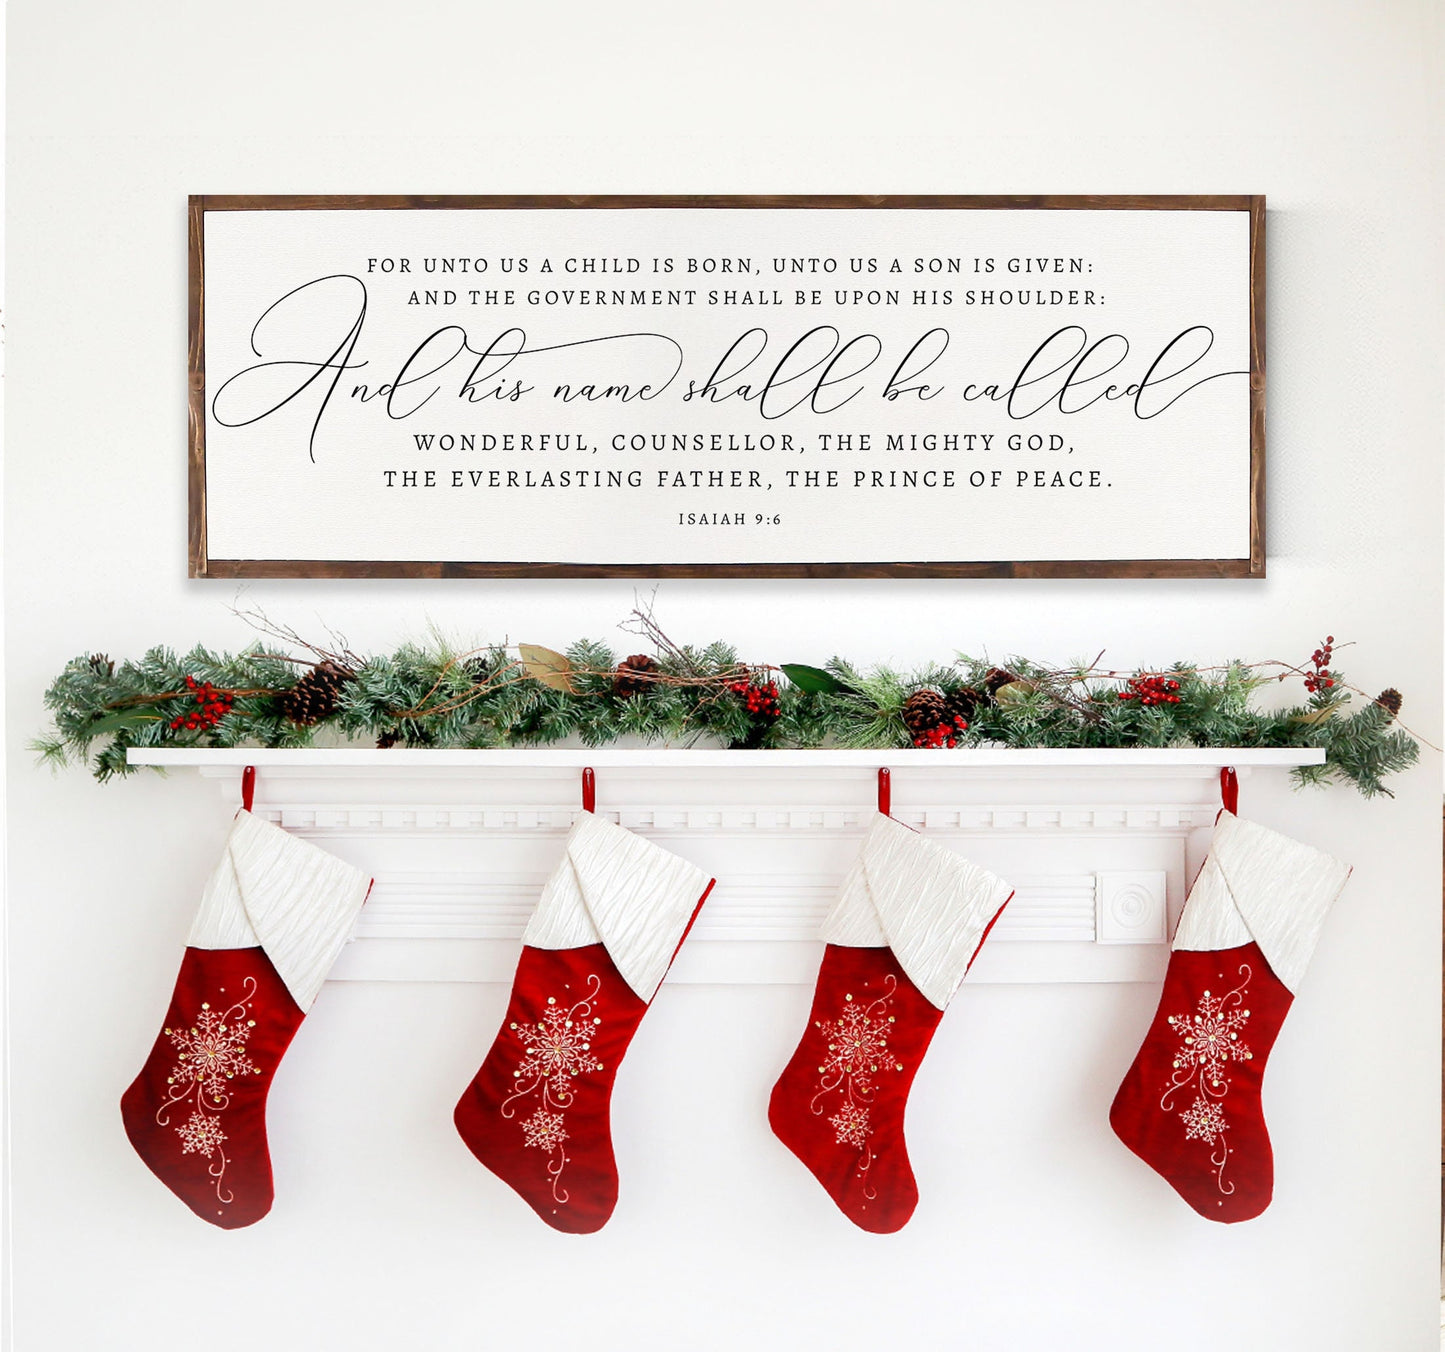 For Unto Us a child is born, unto us Son is given - Christmas Rustic Wood Sign Isaiah 9:6 | Large Christmas wood sign | Christmas Decor